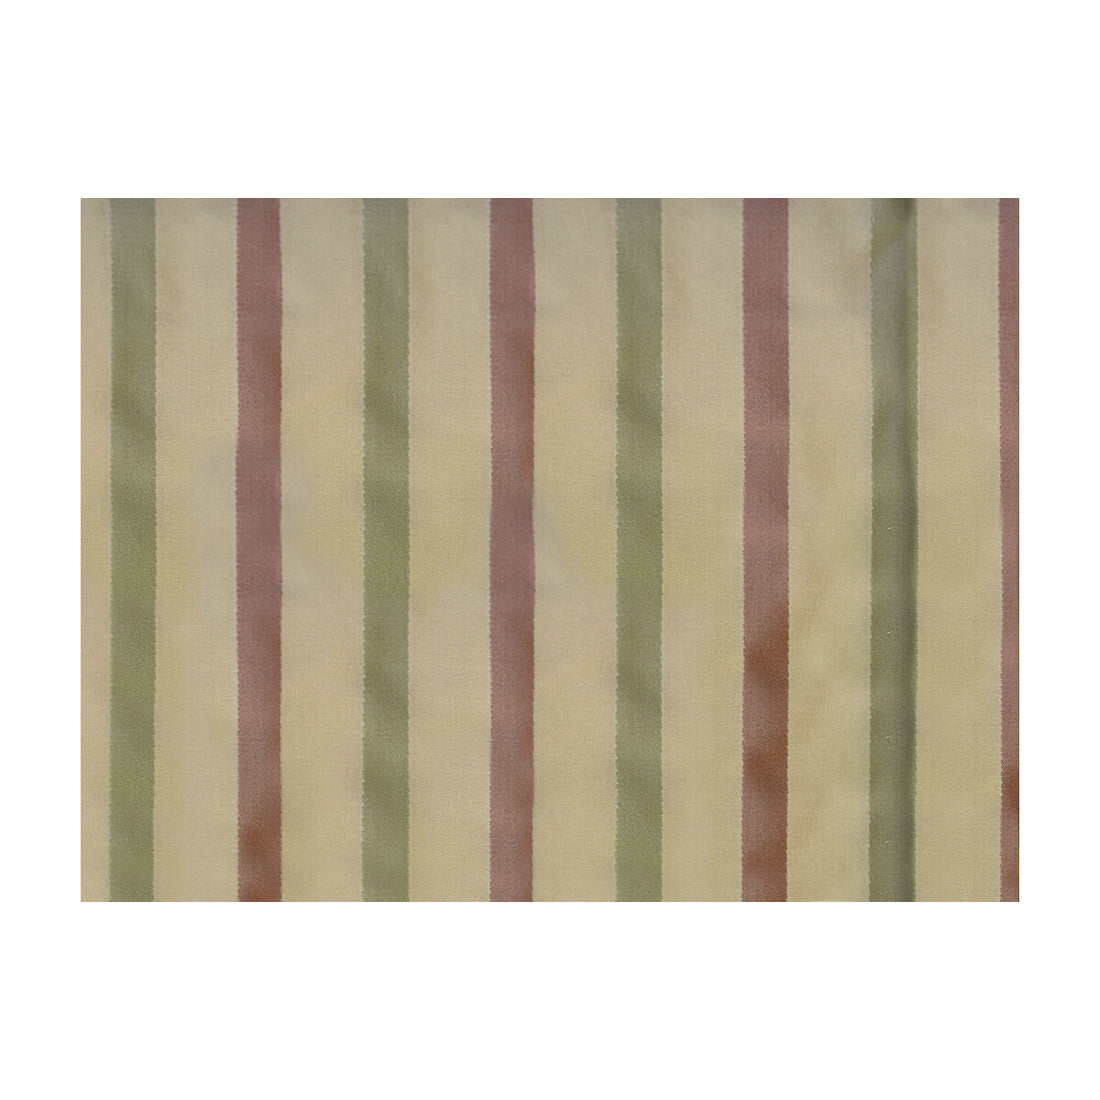 Modern Stripe fabric in copper jade color - pattern JAG-50023.2430.0 - by Brunschwig &amp; Fils in the Jagtar collection